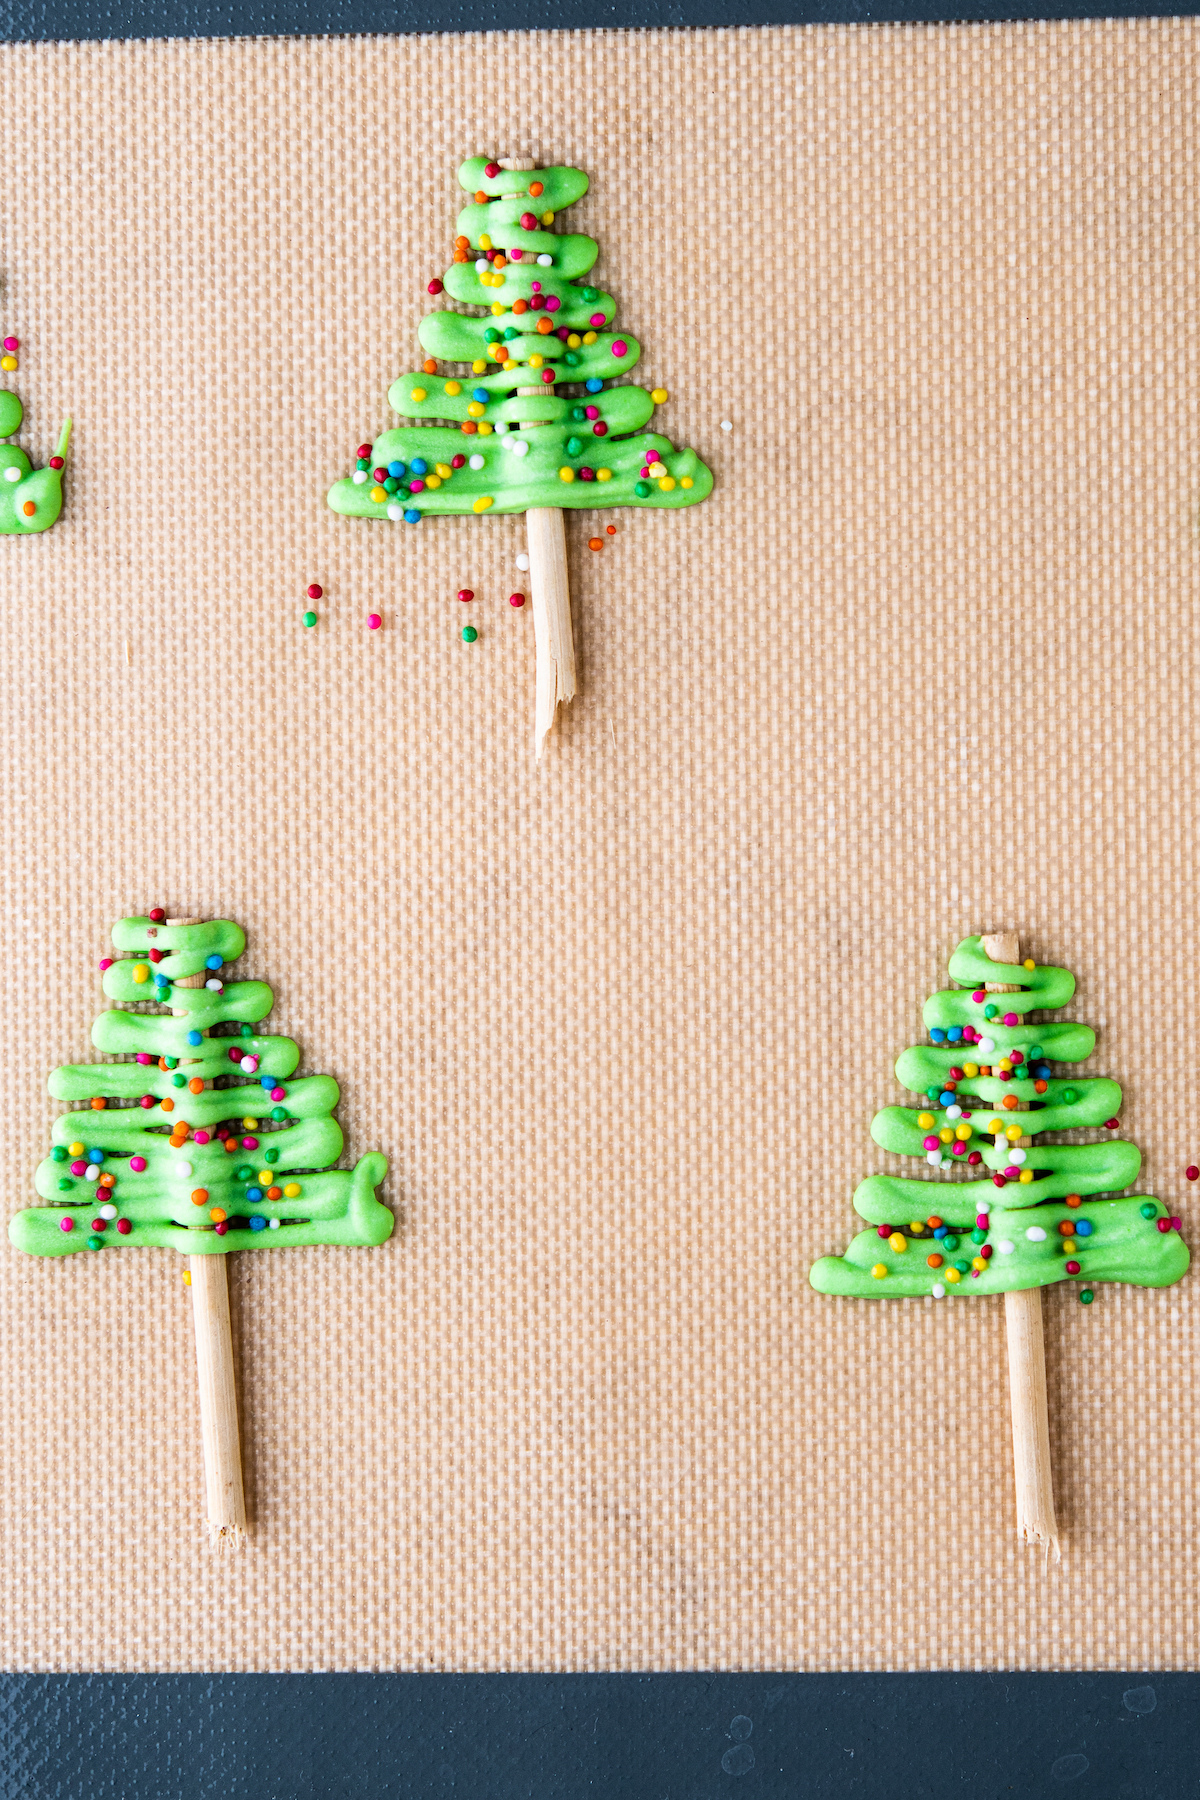 Green colored chocolate drizzled over pretzels to make trees